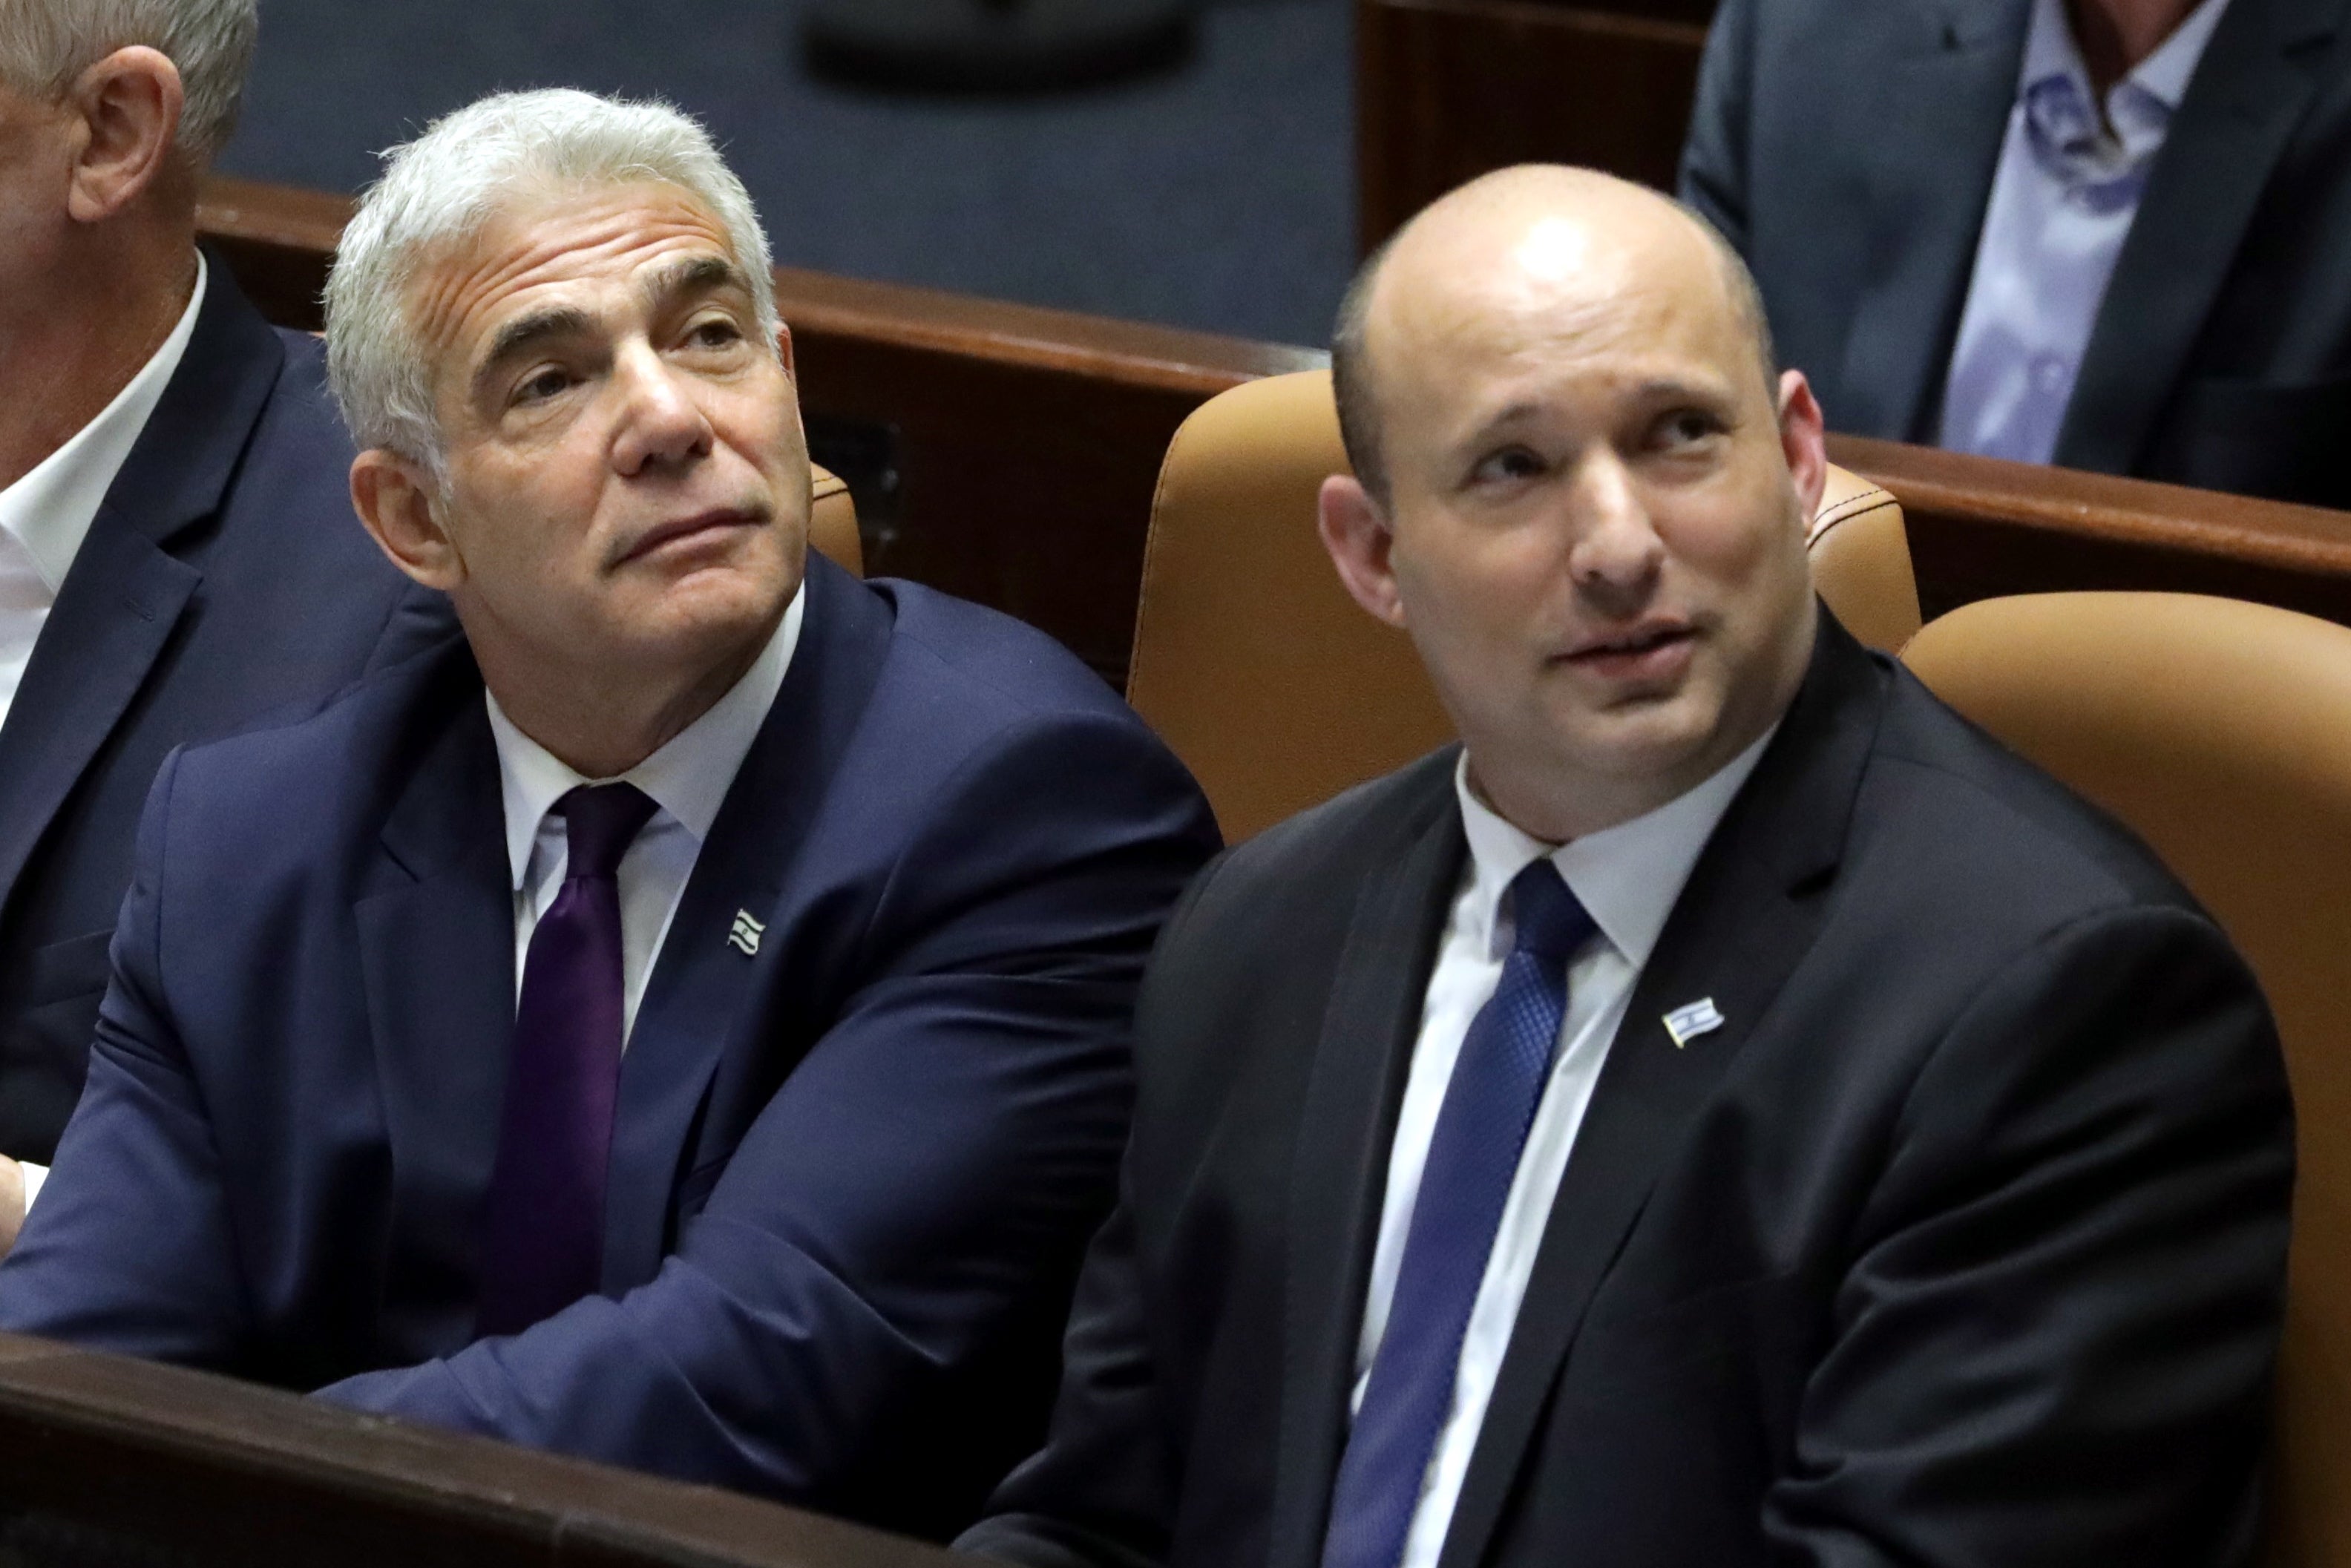 Israel’s Knesset sets stage for snap election after lawmakers vote to dissolve parliament